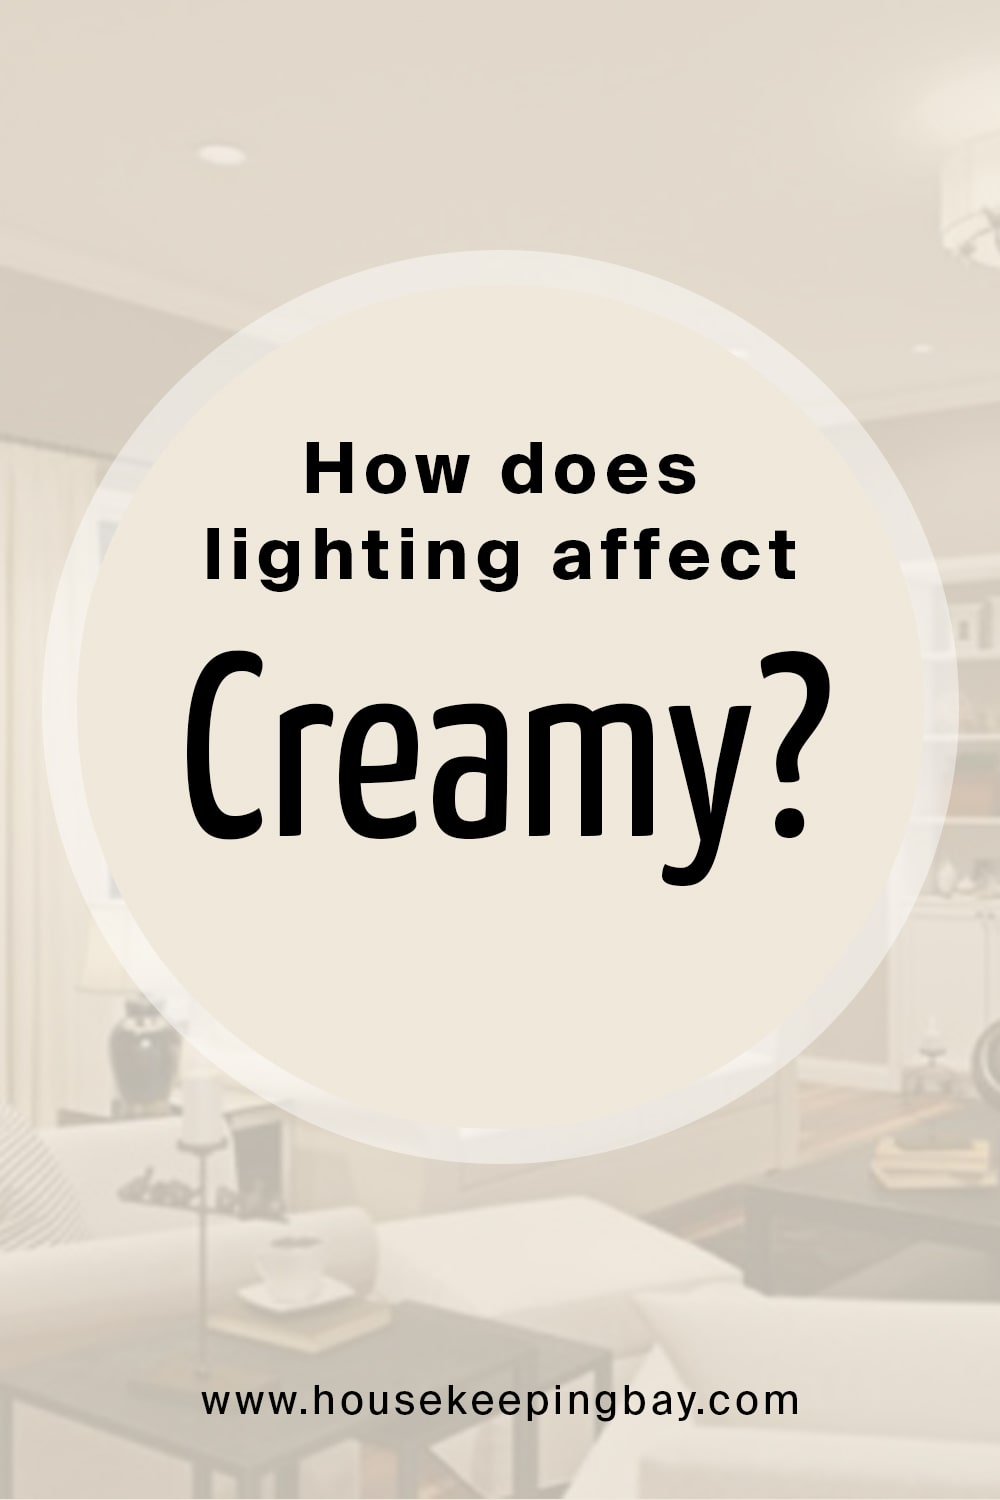 How does lighting affect Cream